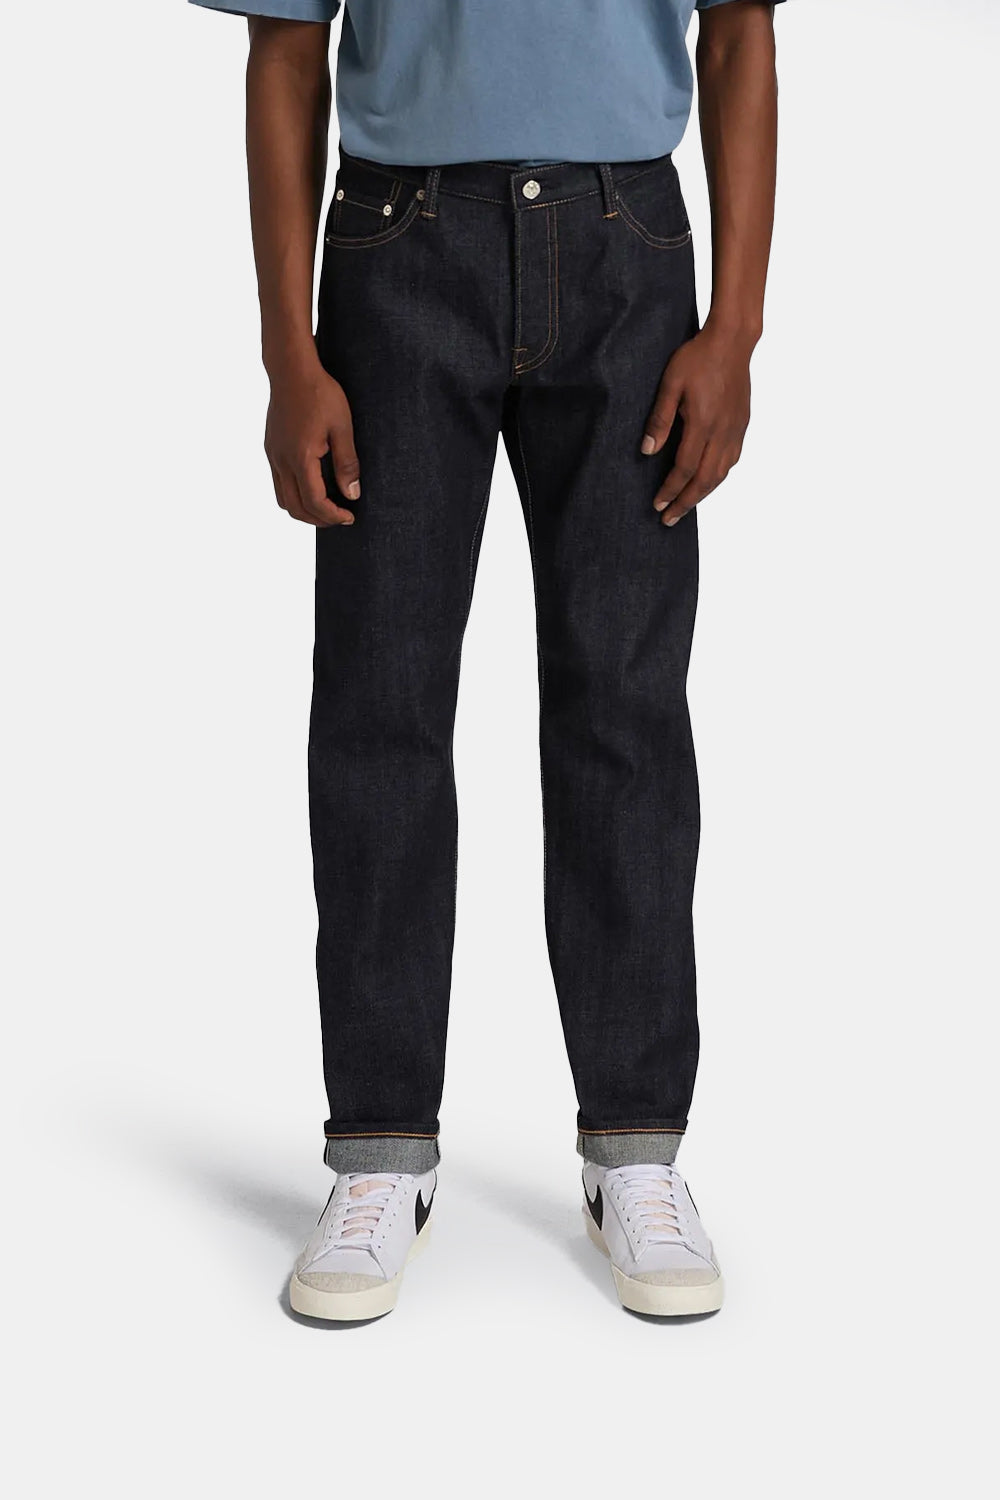 Edwin Regular Tapered Kurabo Recycled Denim Jeans (Unwashed Blue) | Number Six